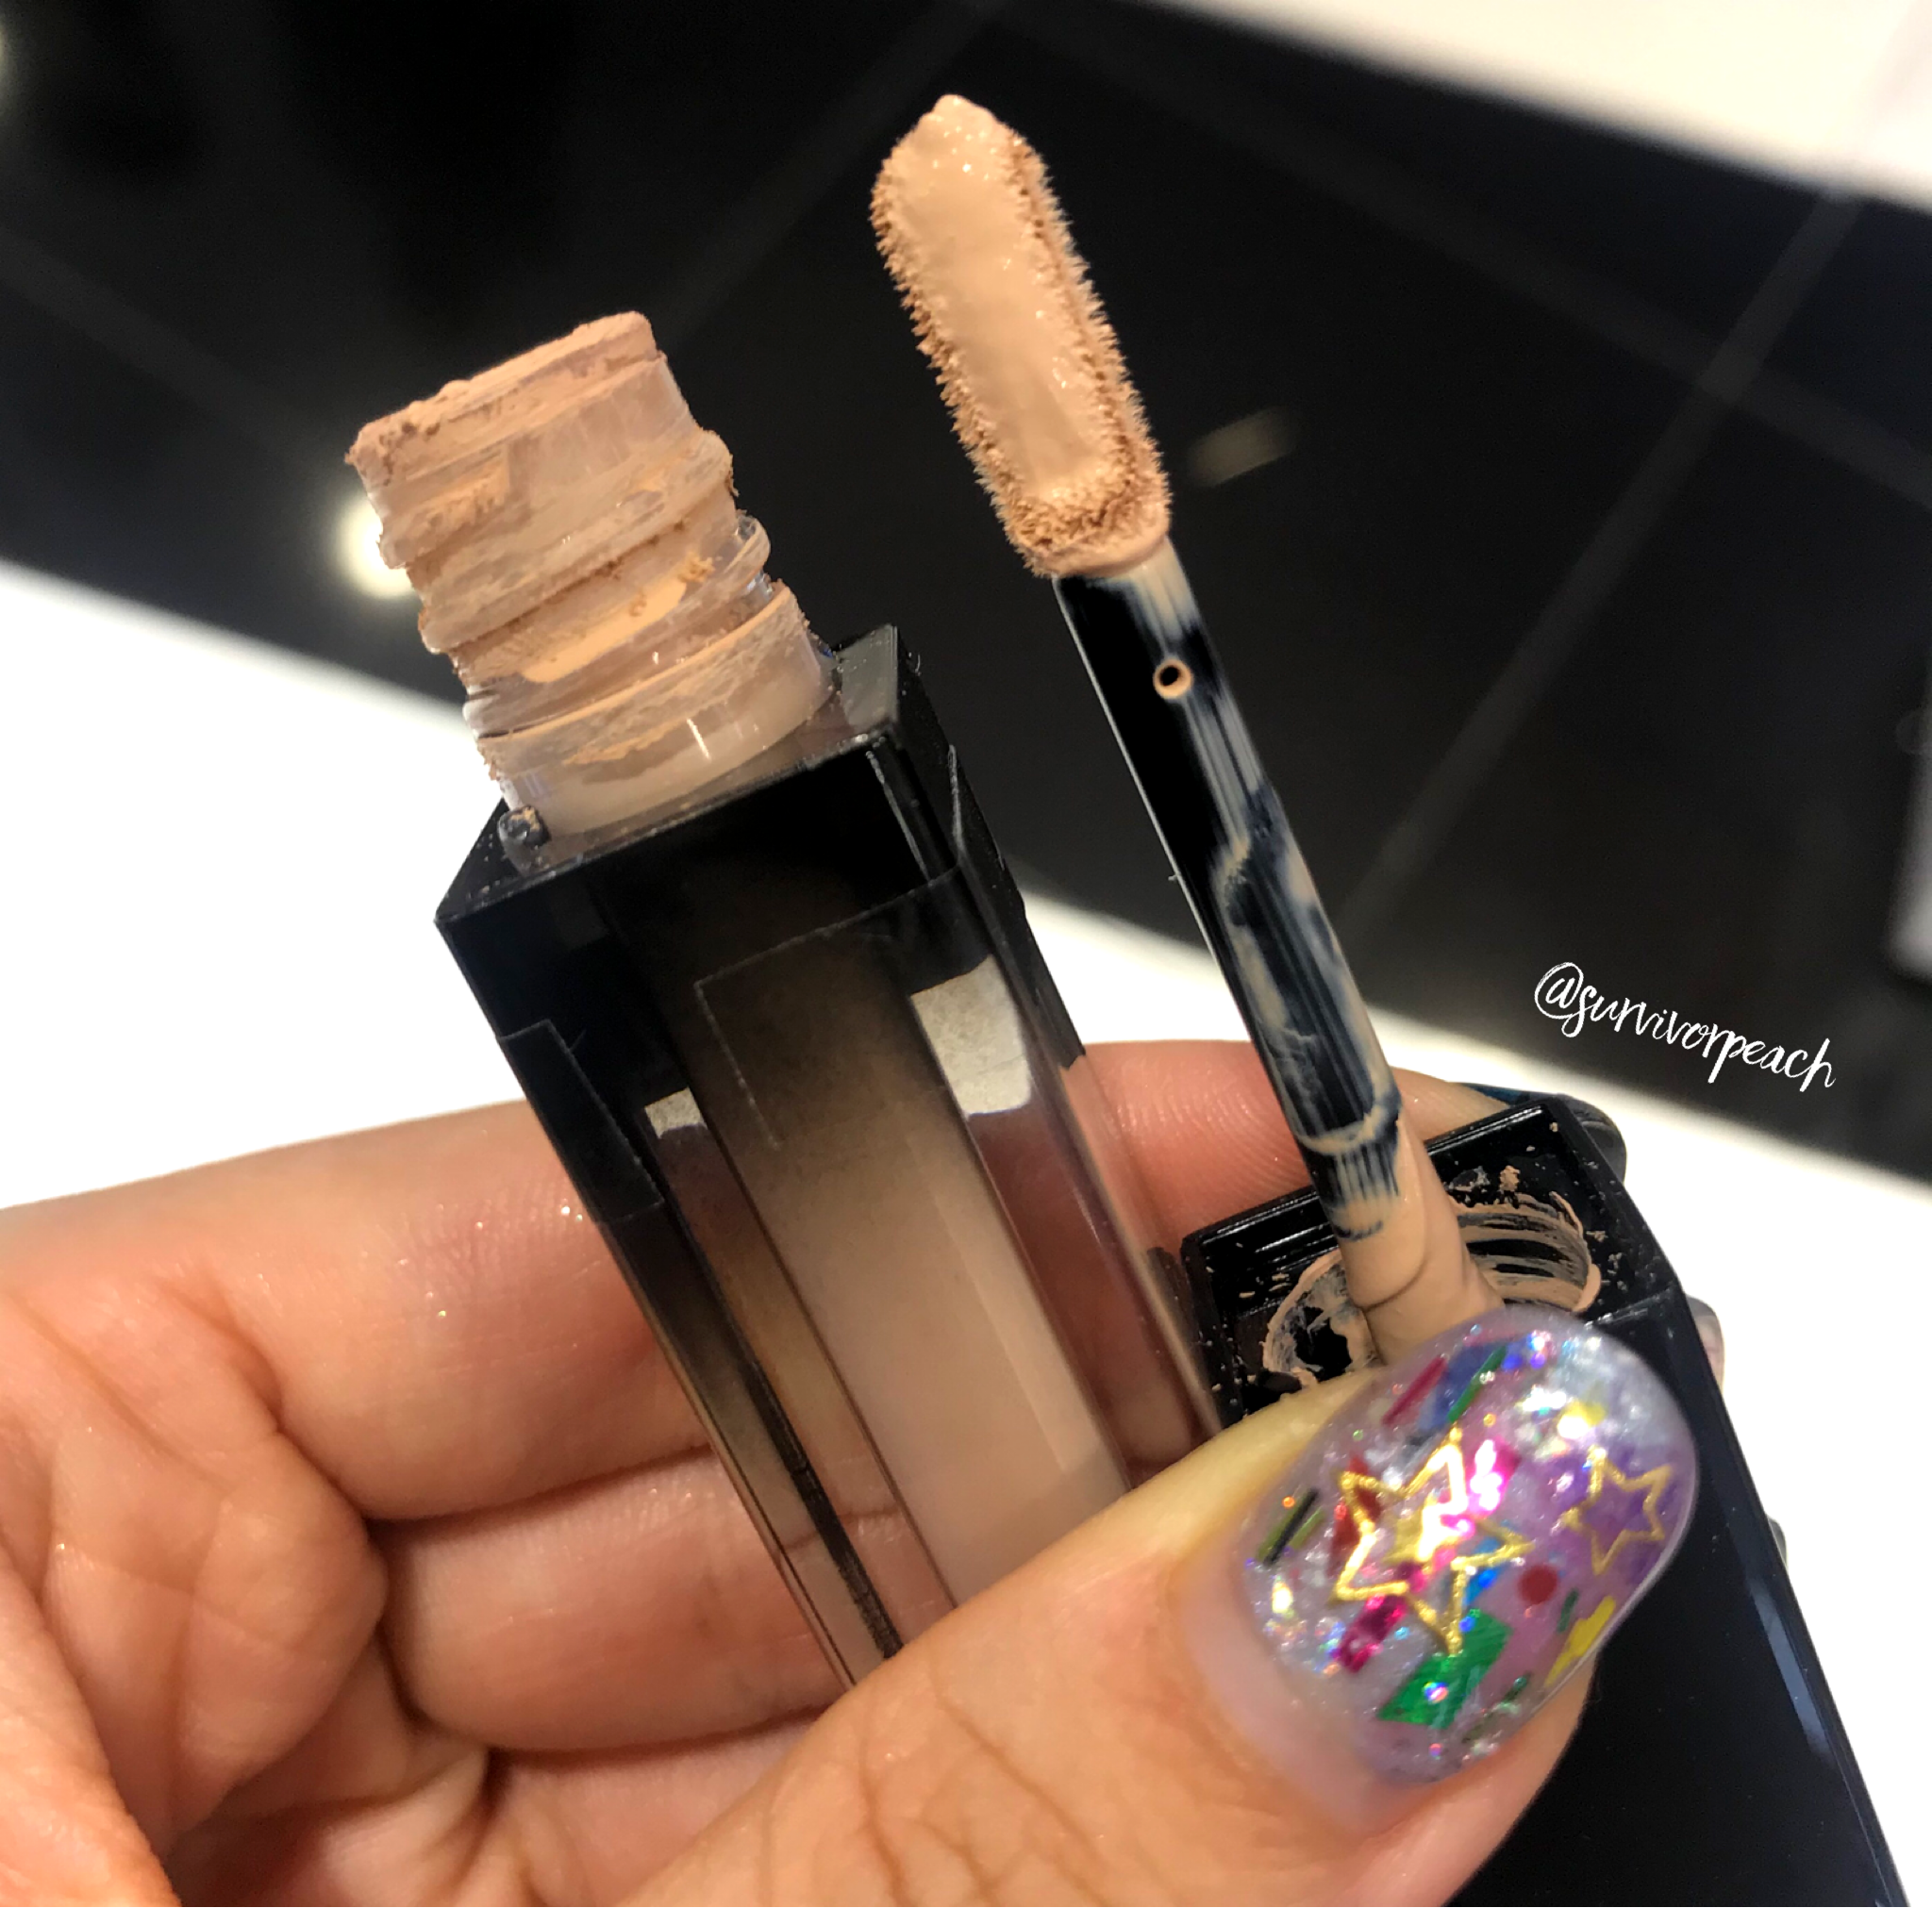 Huda Beauty Matte & Metal Melted Shadow swatches — Survivorpeach